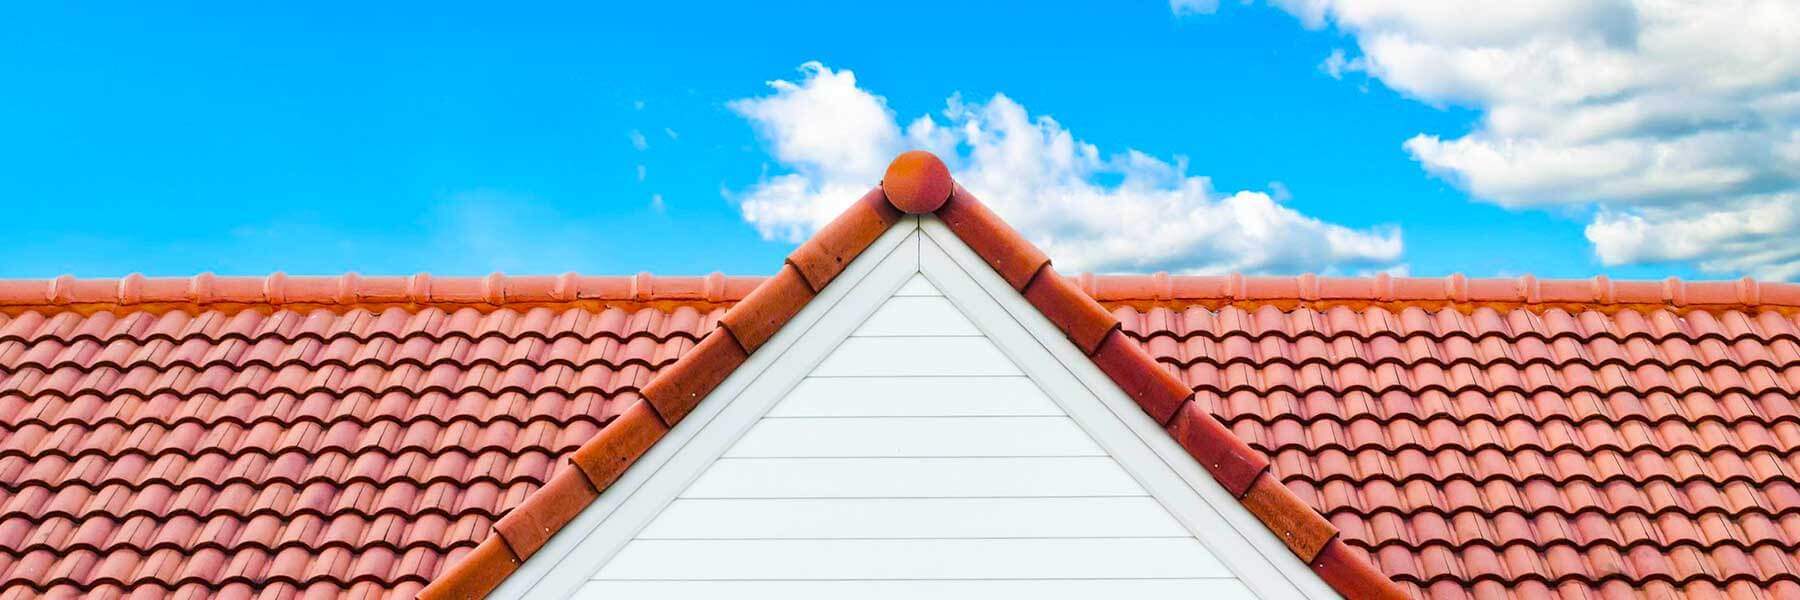 Beautiful Clay Tiled Roof